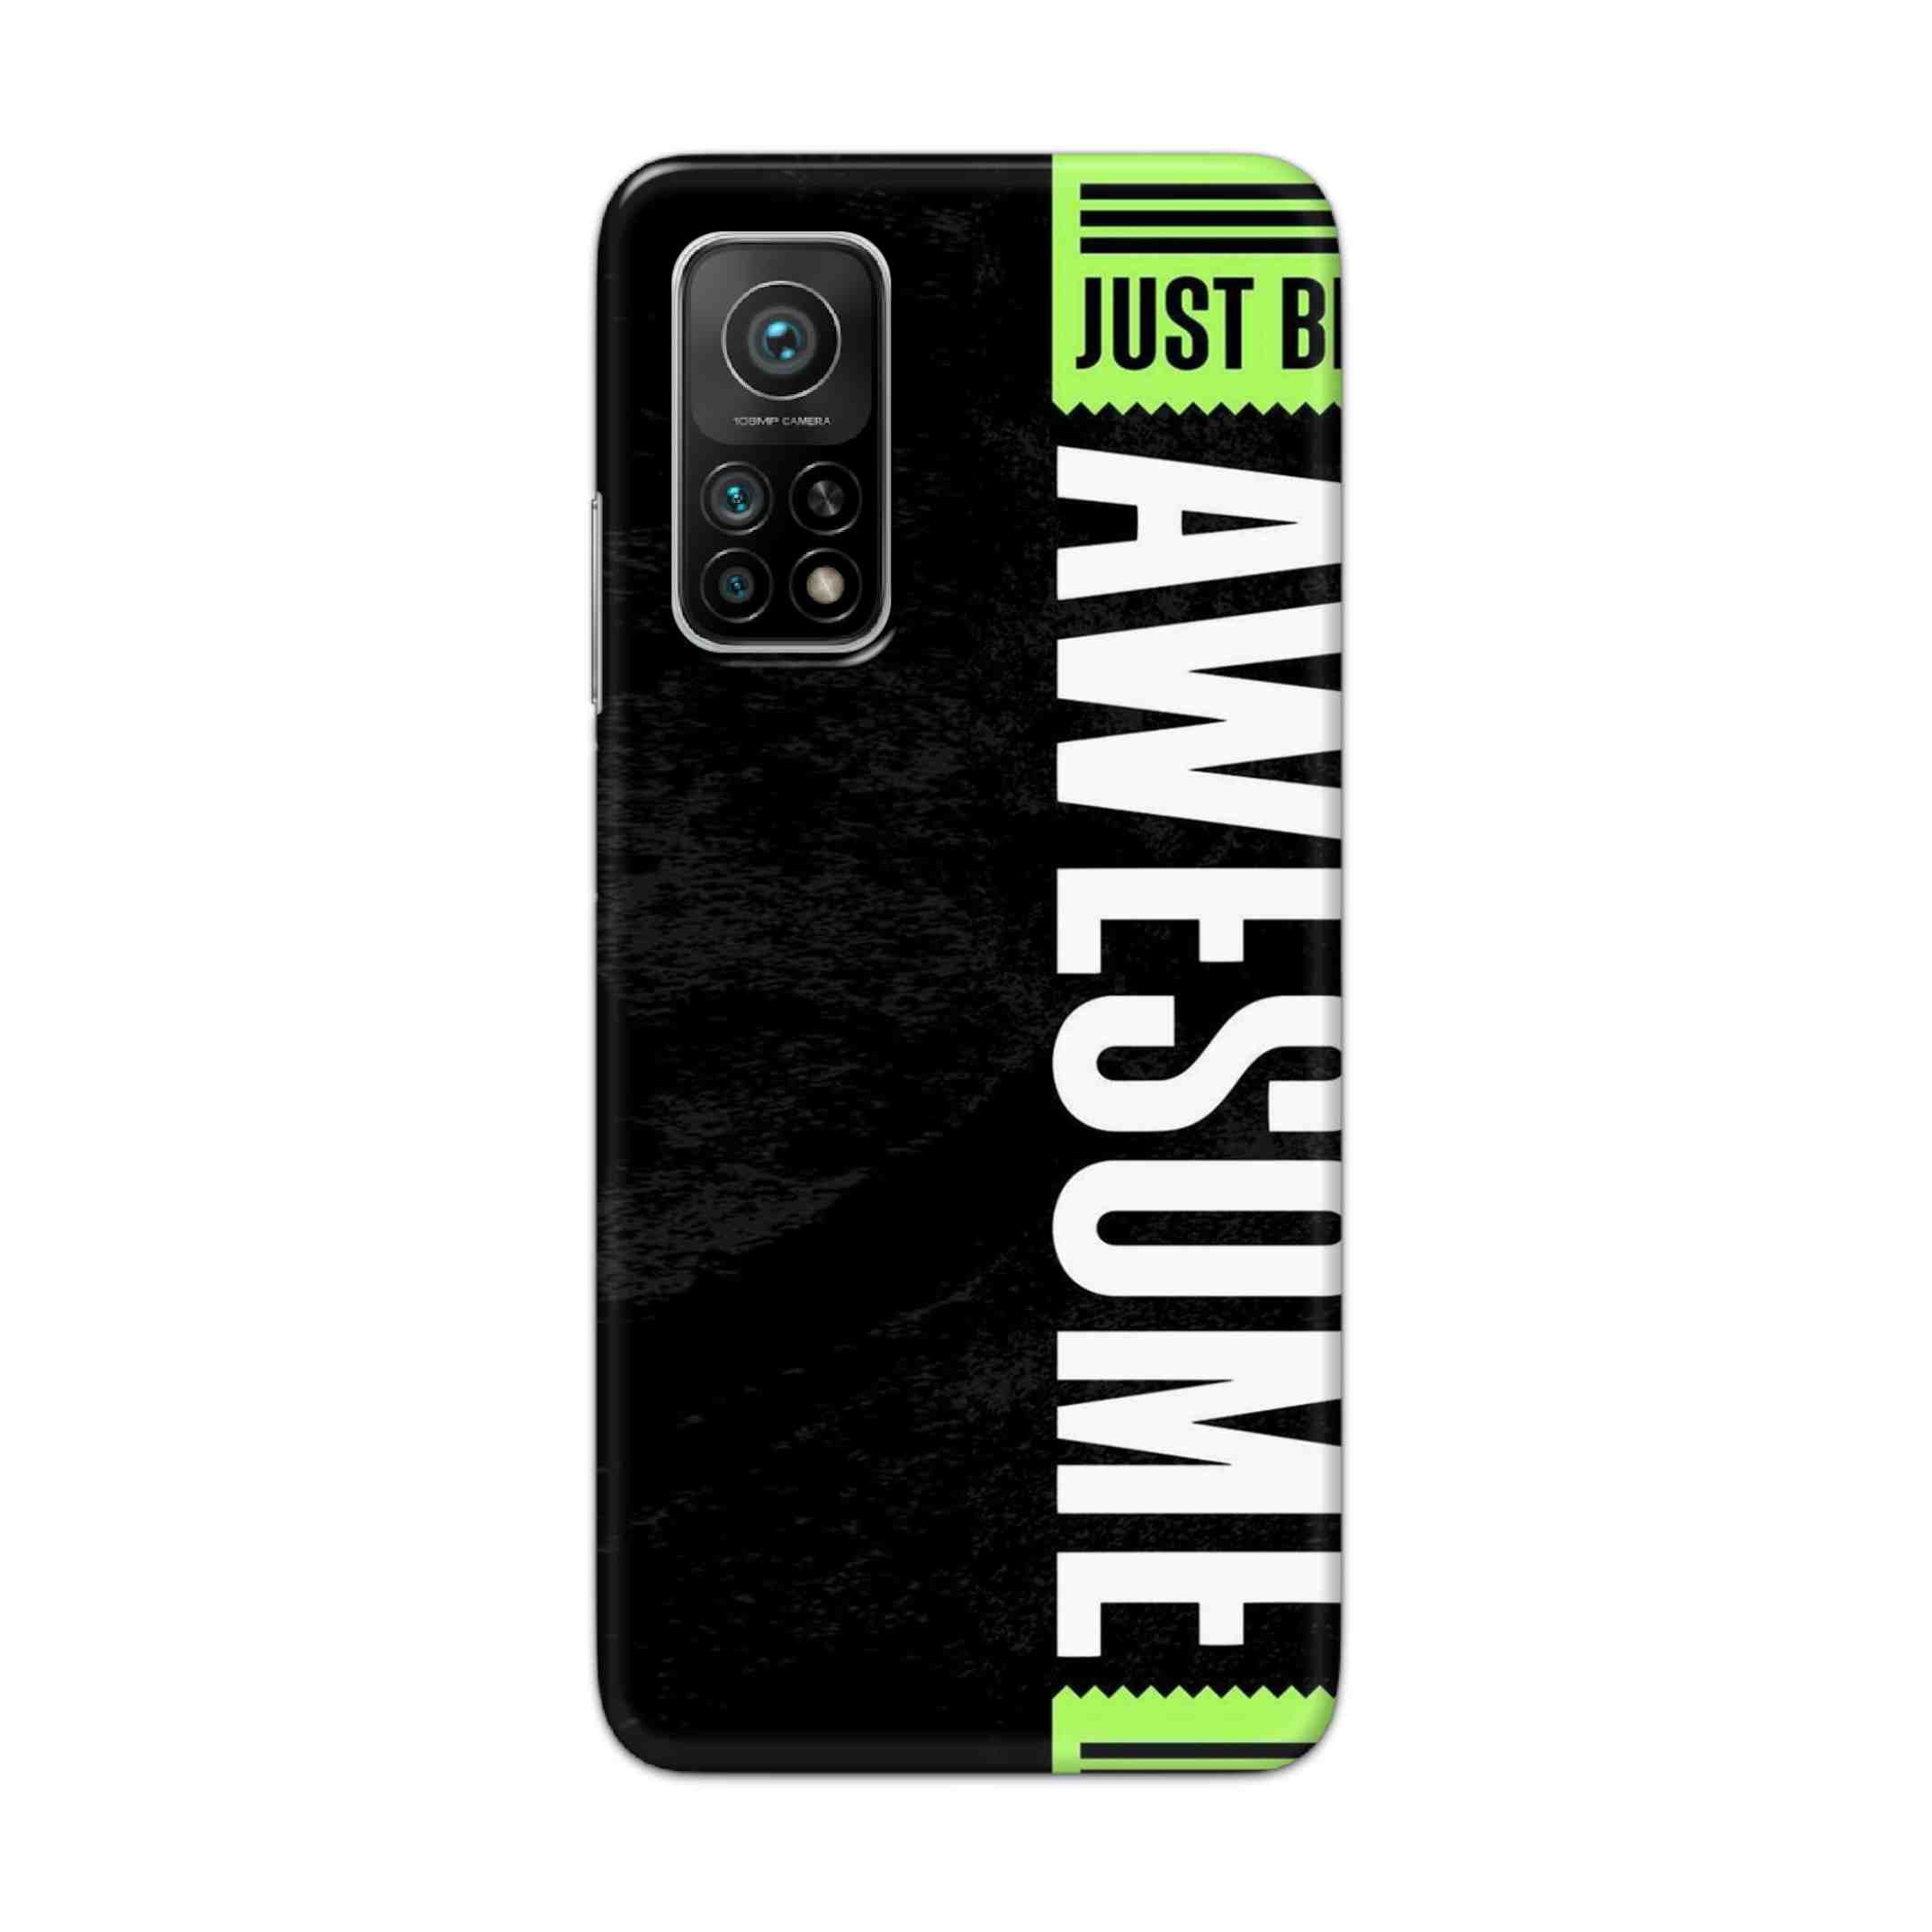 Buy Awesome Street Hard Back Mobile Phone Case Cover For Xiaomi Mi 10T 5G Online